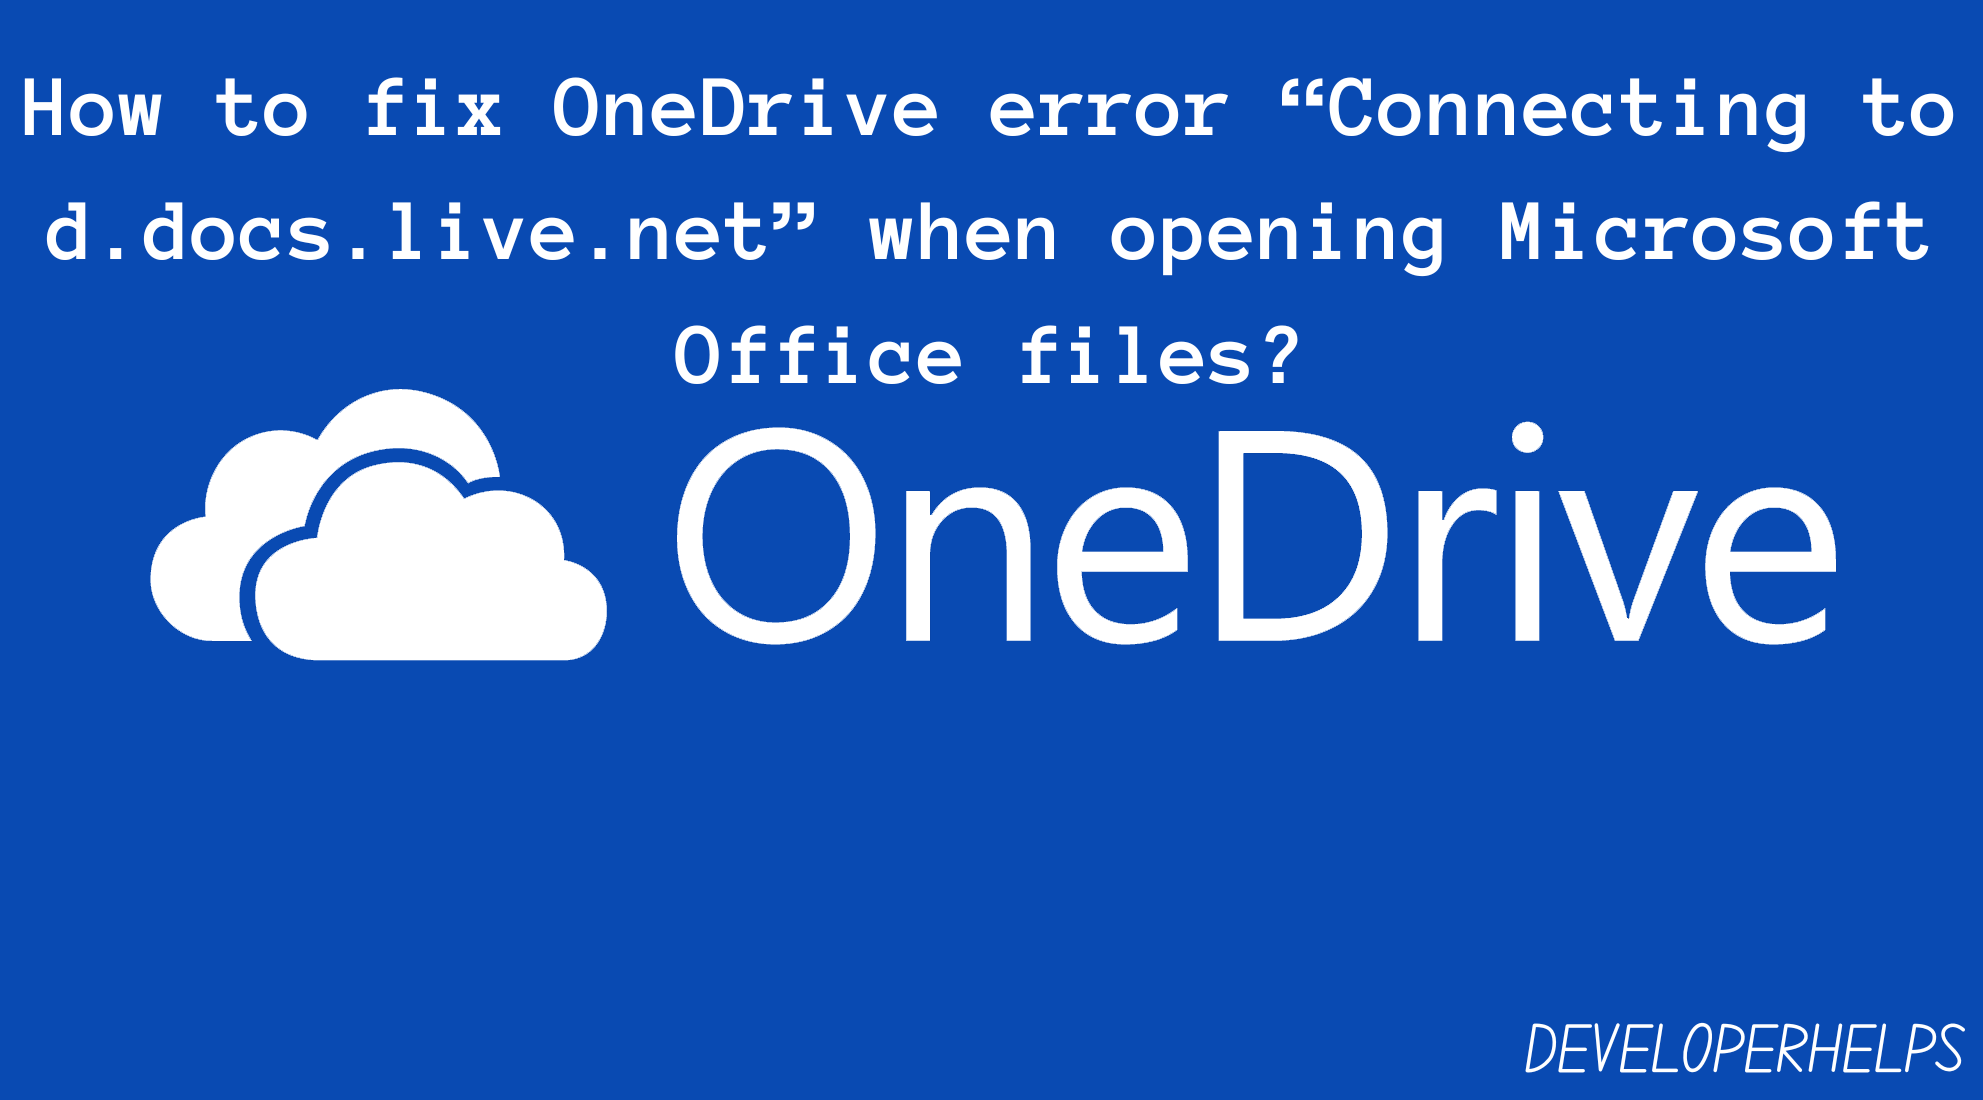 Fix the OneDrive error “Connecting to d.docs.live.net”